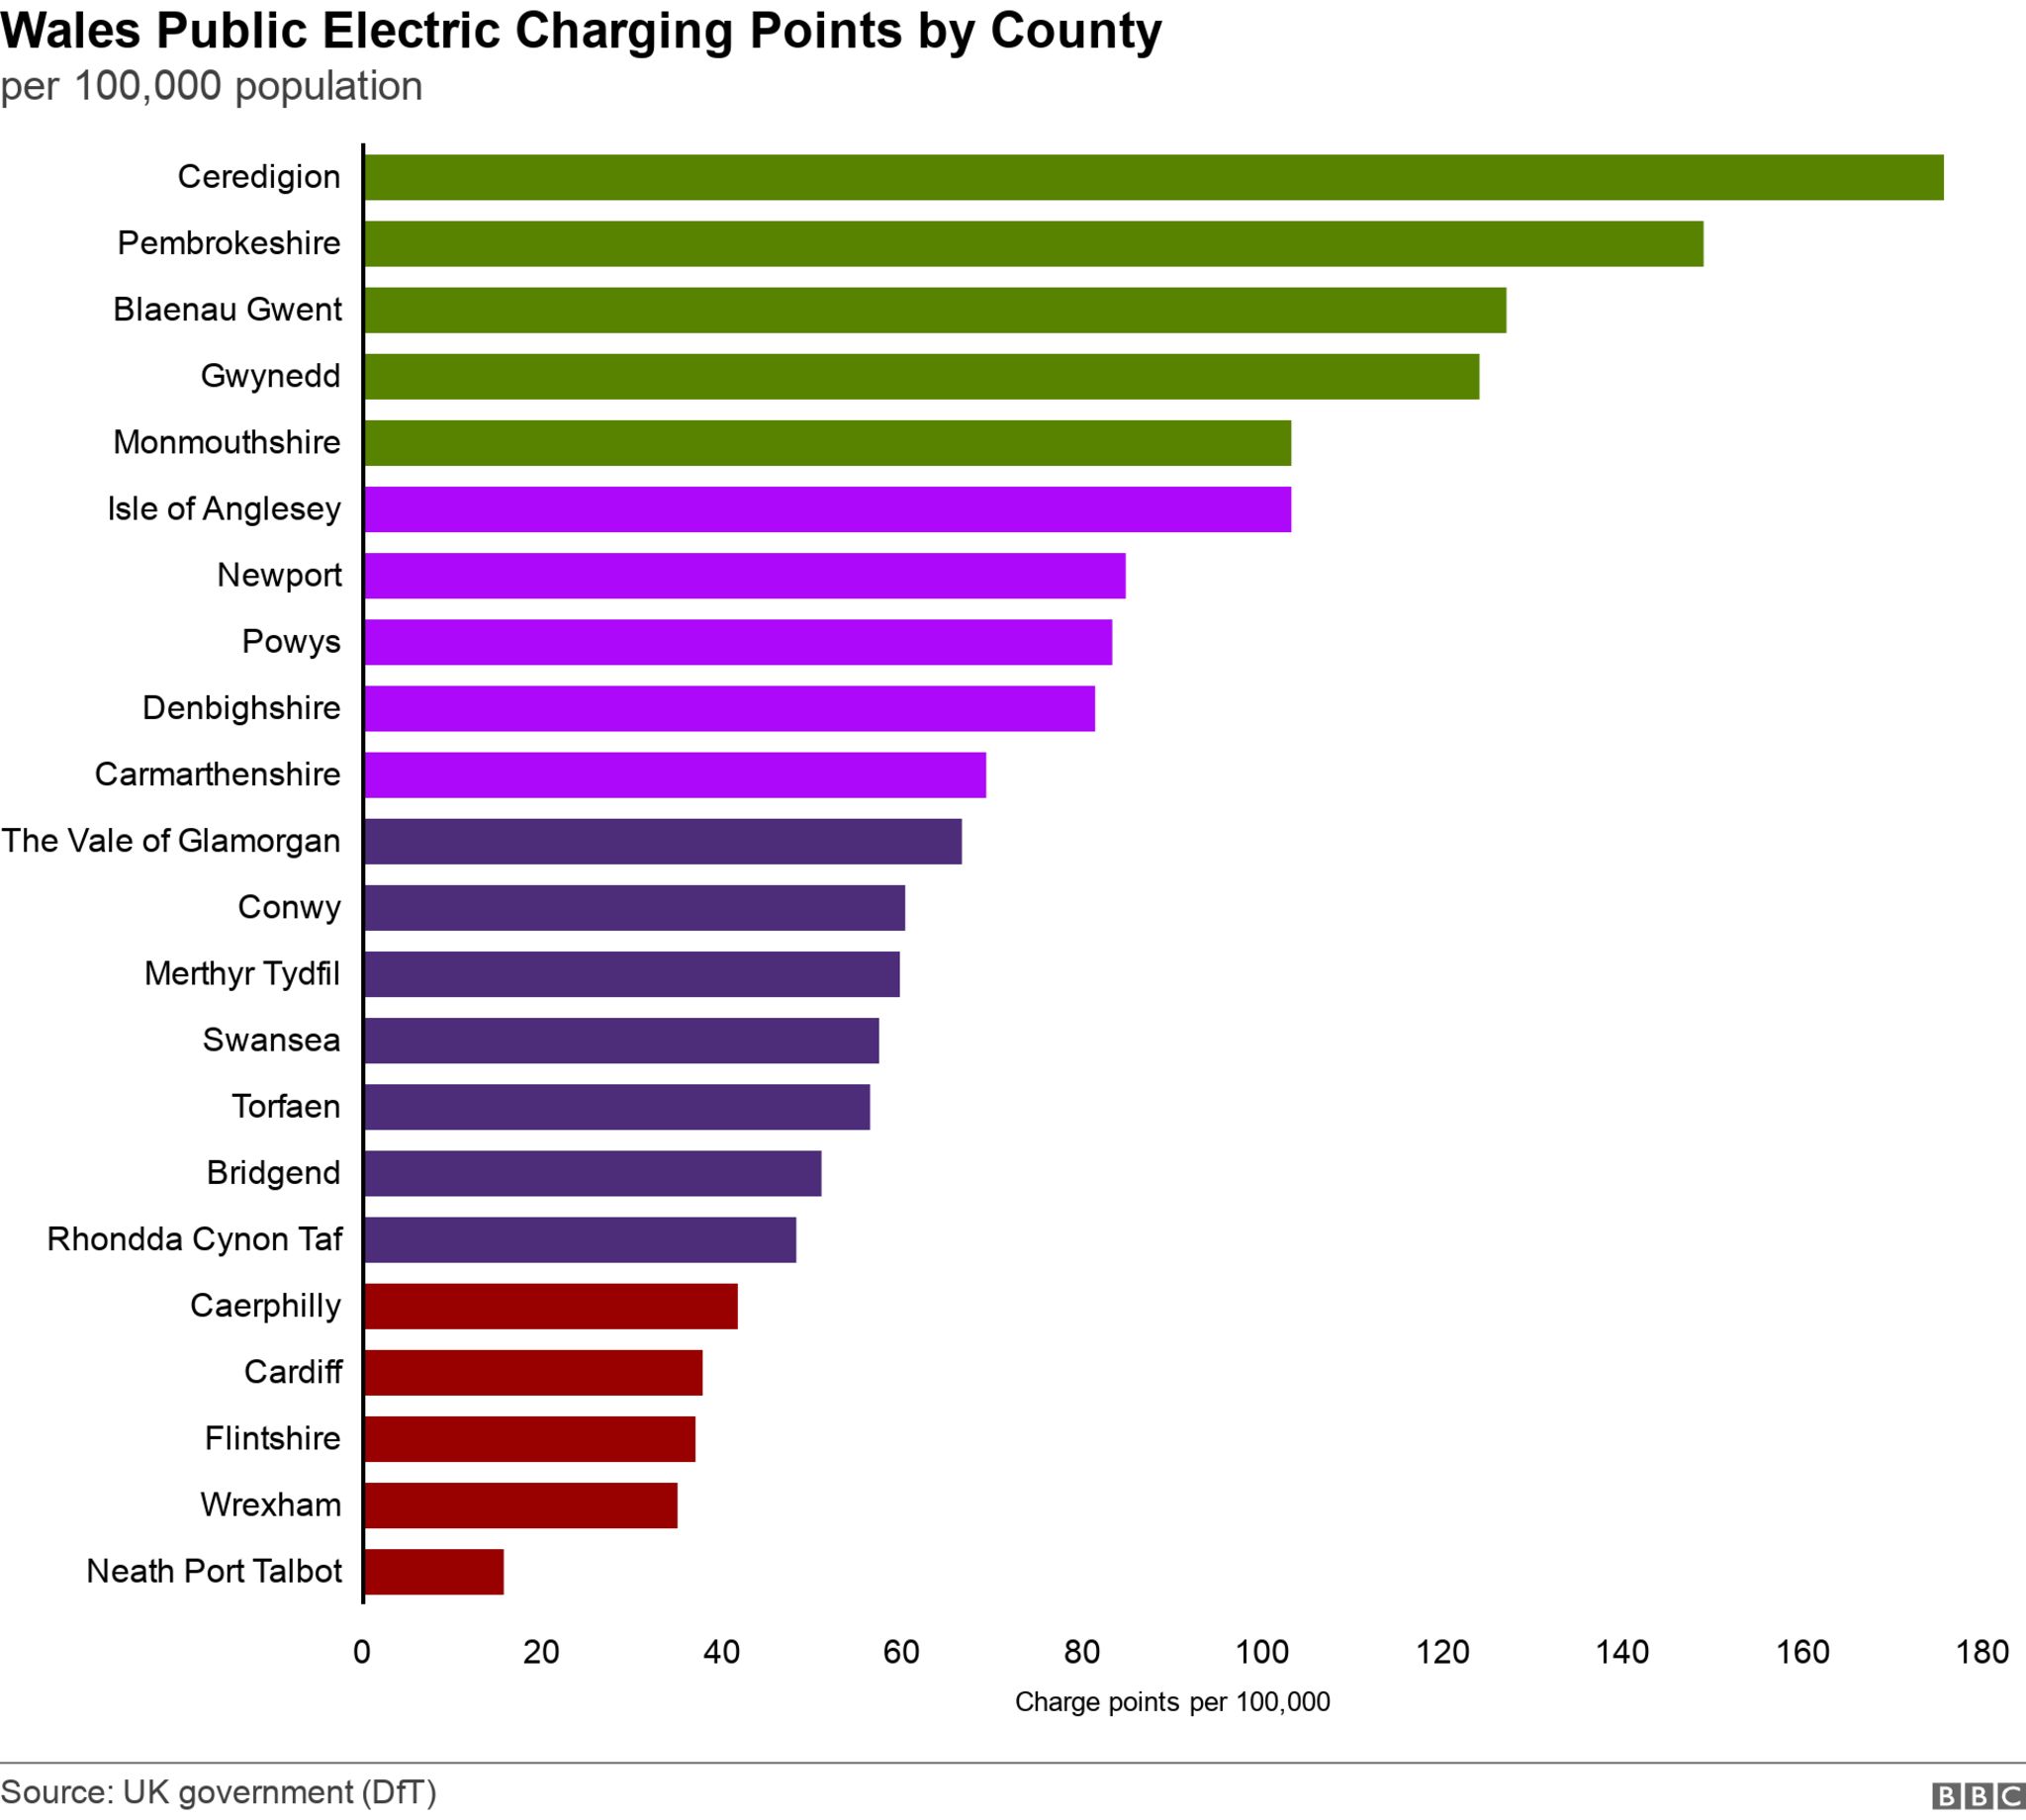 Public EV charging per 100,000 population for local authorities in Wales